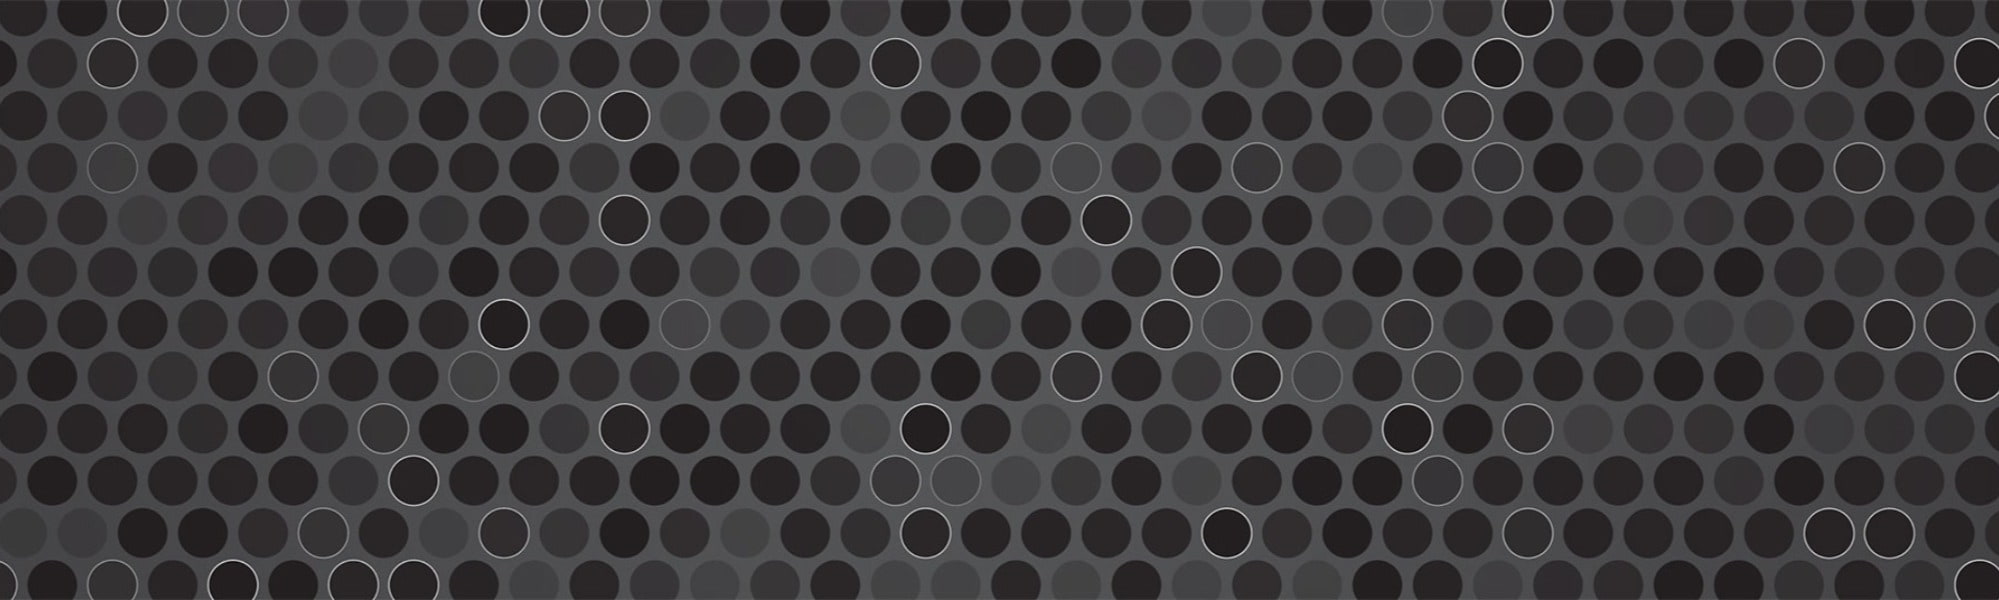 Abstract dark gray background with seamless geometric oval pattern.